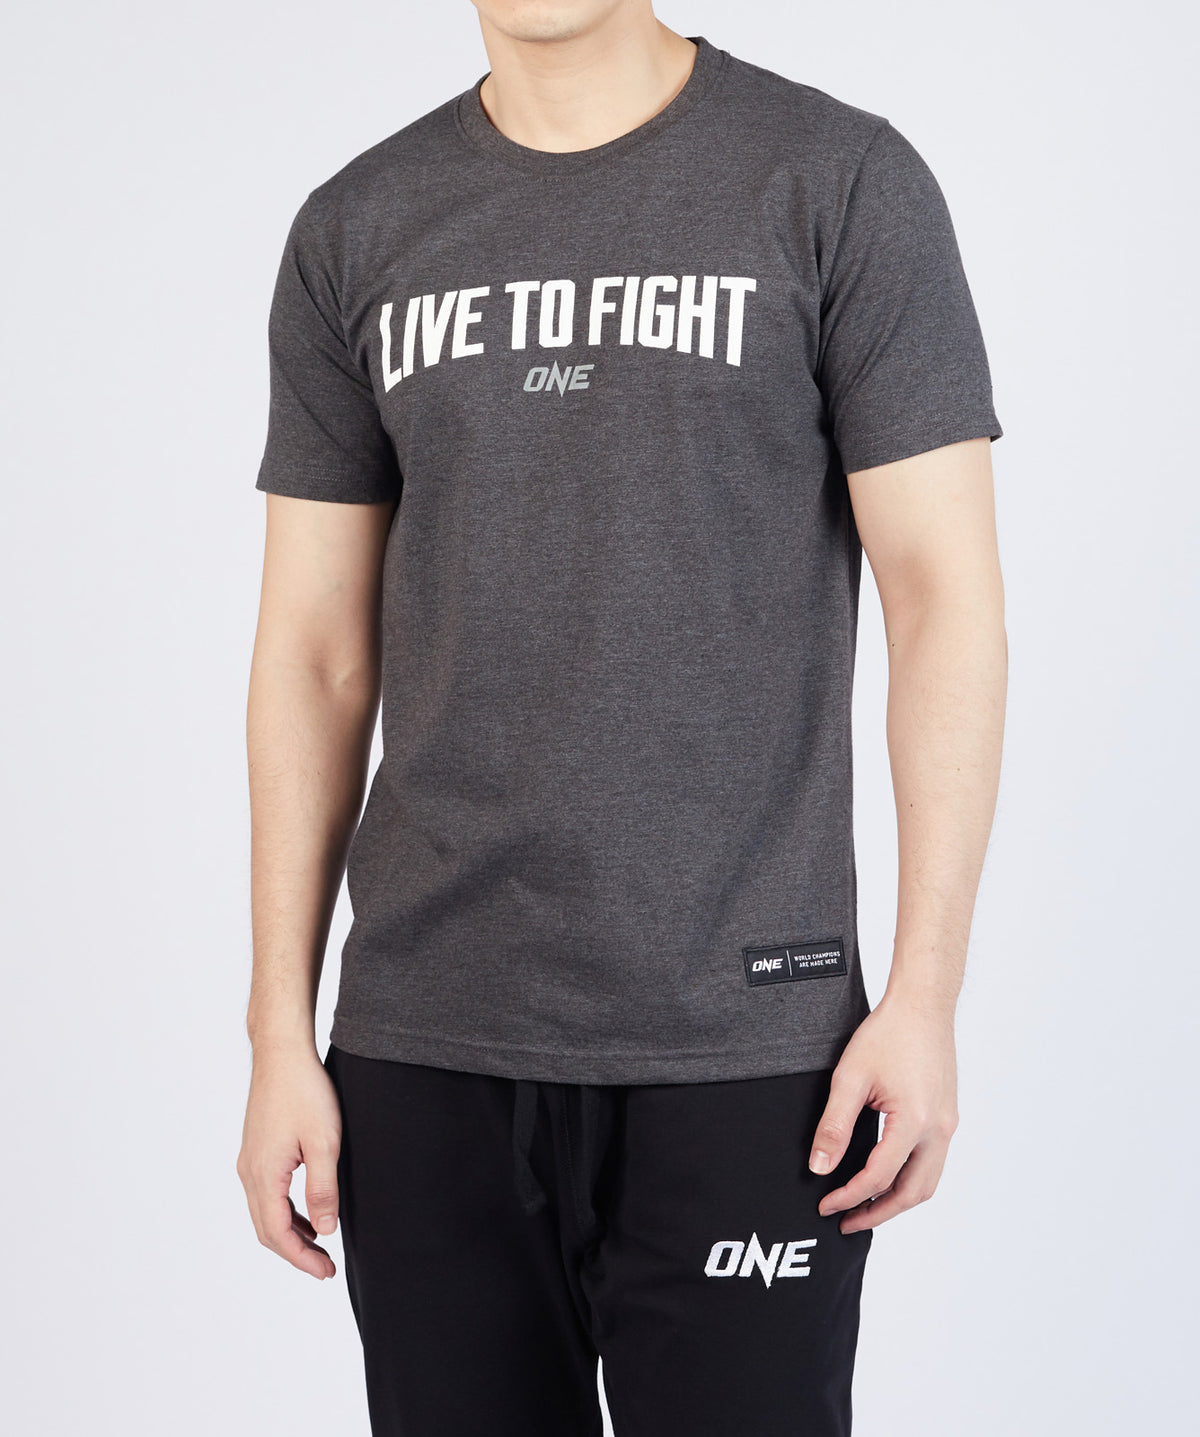 Live to Fight Tee